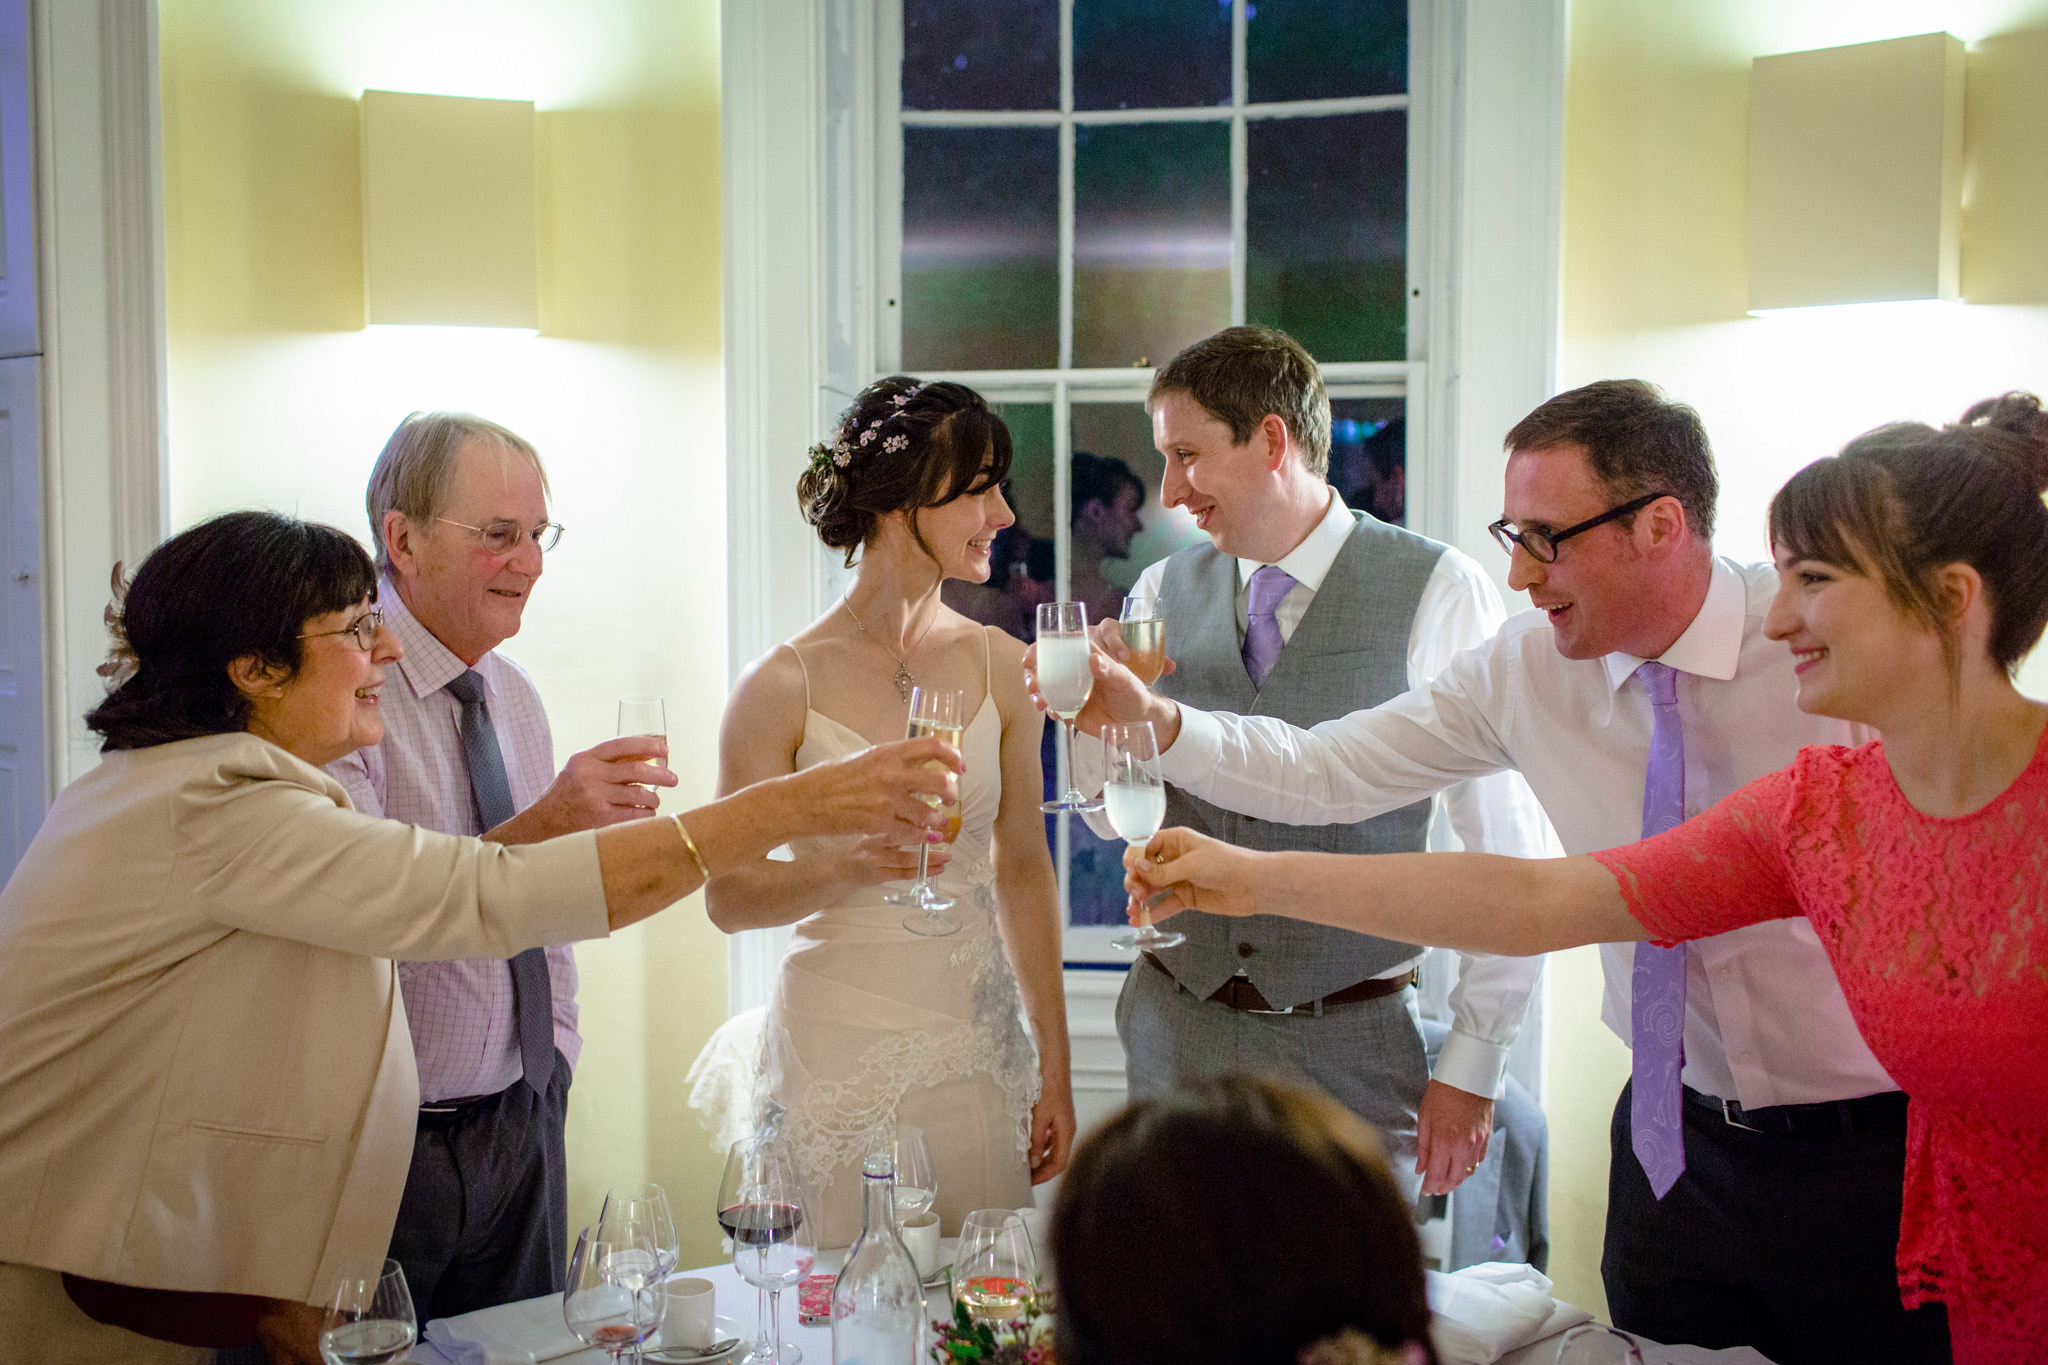 Clissold House wedding toast at the top table